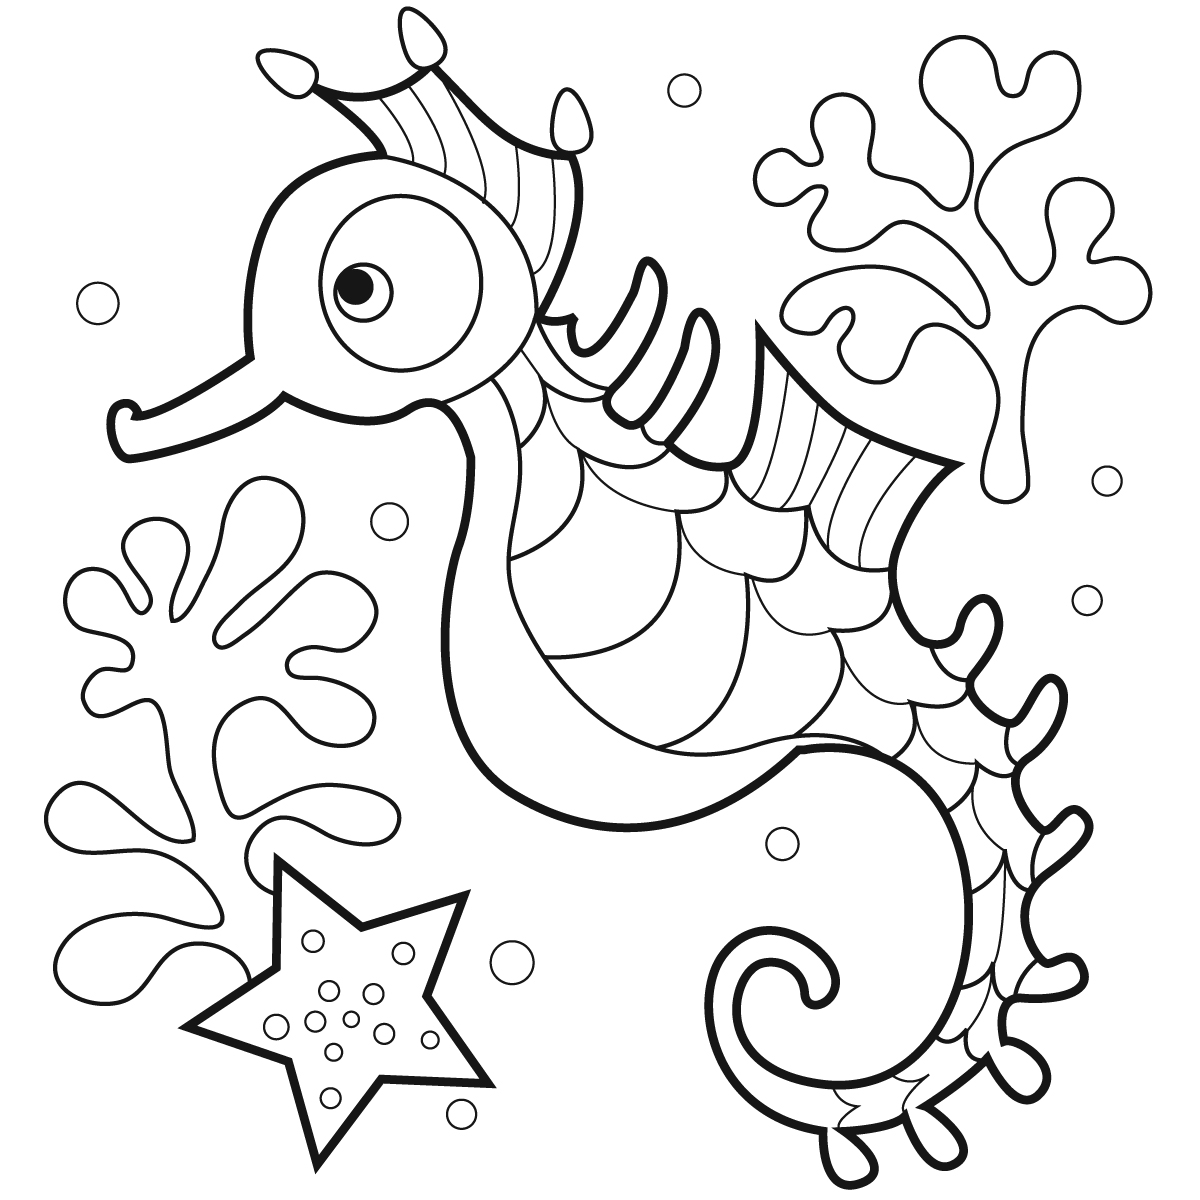 Seahorse-Coloring-Pages.jpg